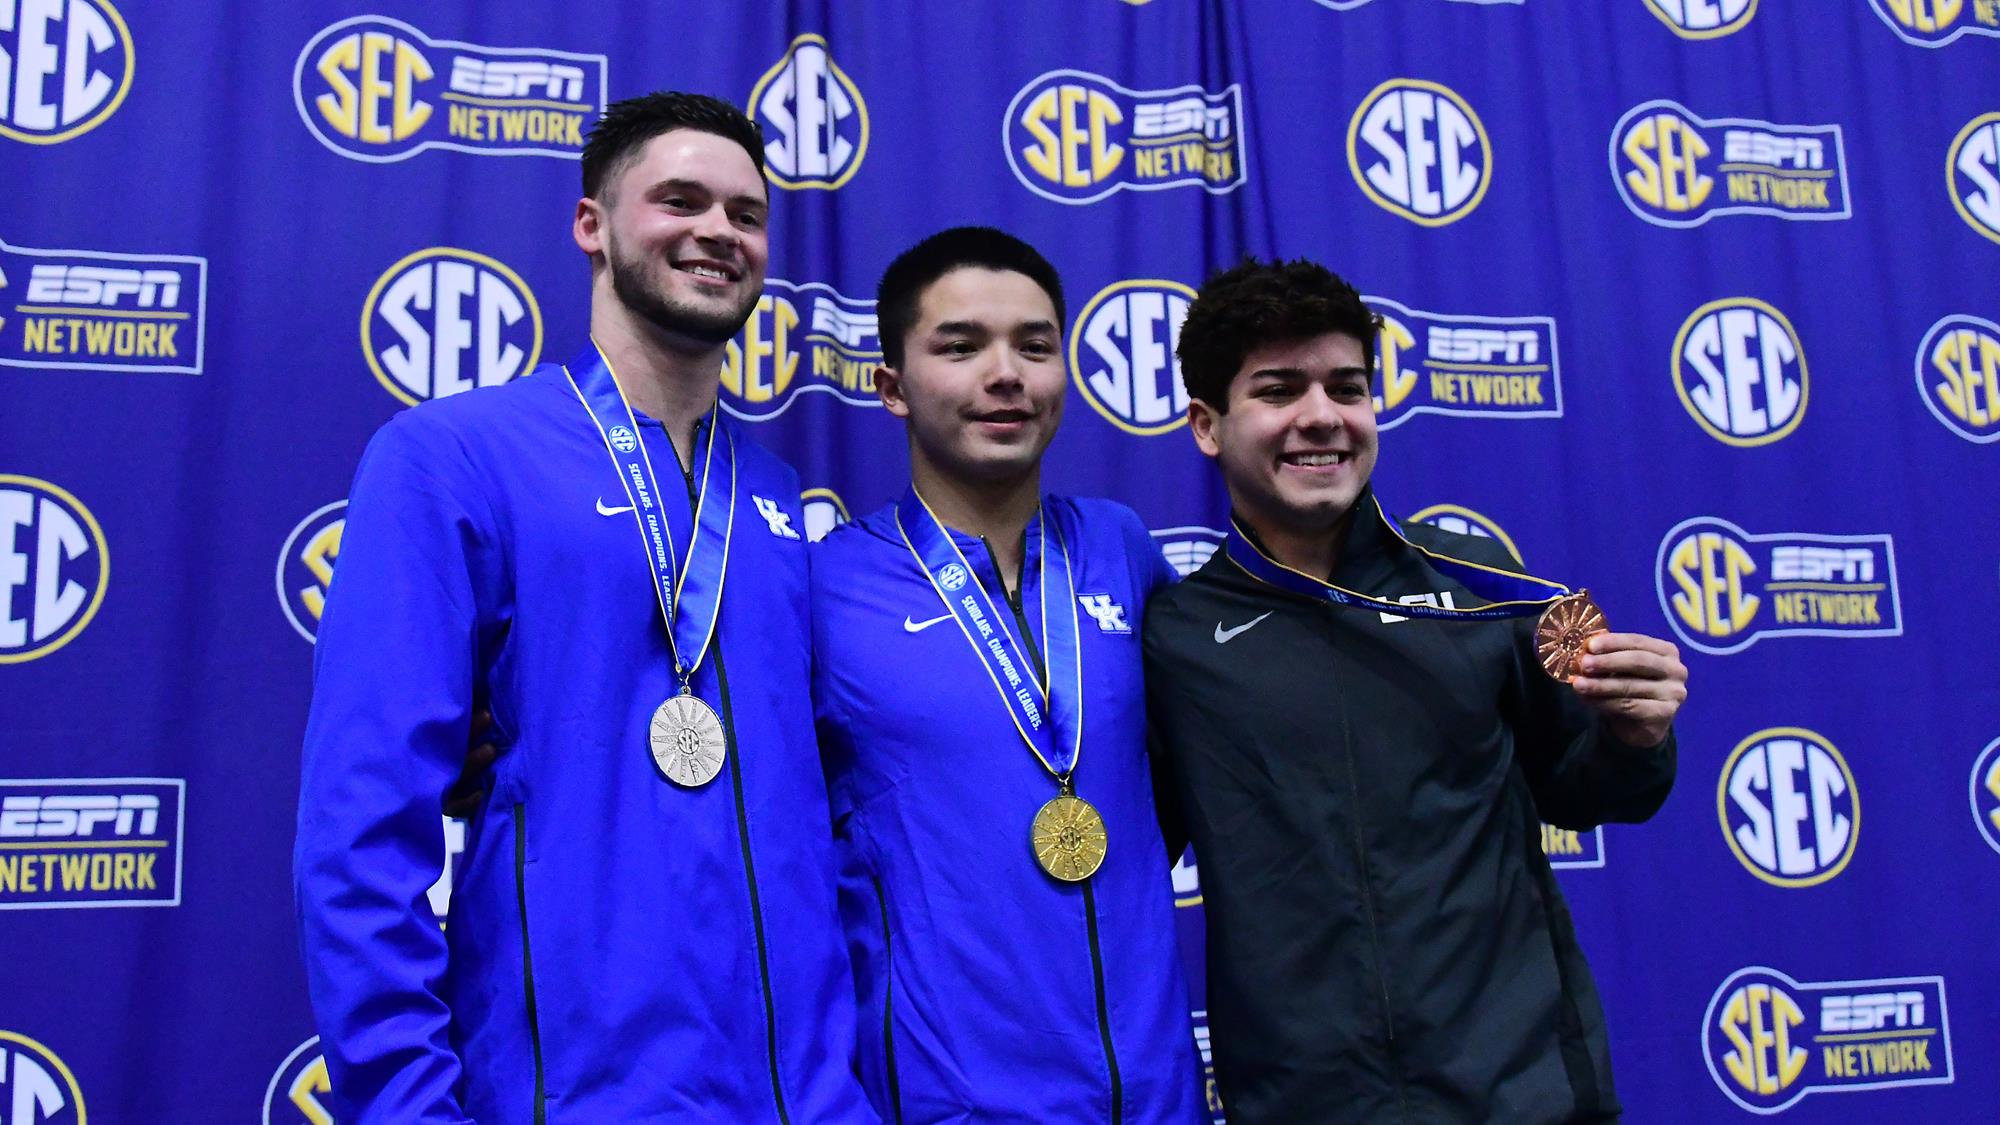 Zhang Named SEC Champion, Five Medals Earned, Two School Records Broken